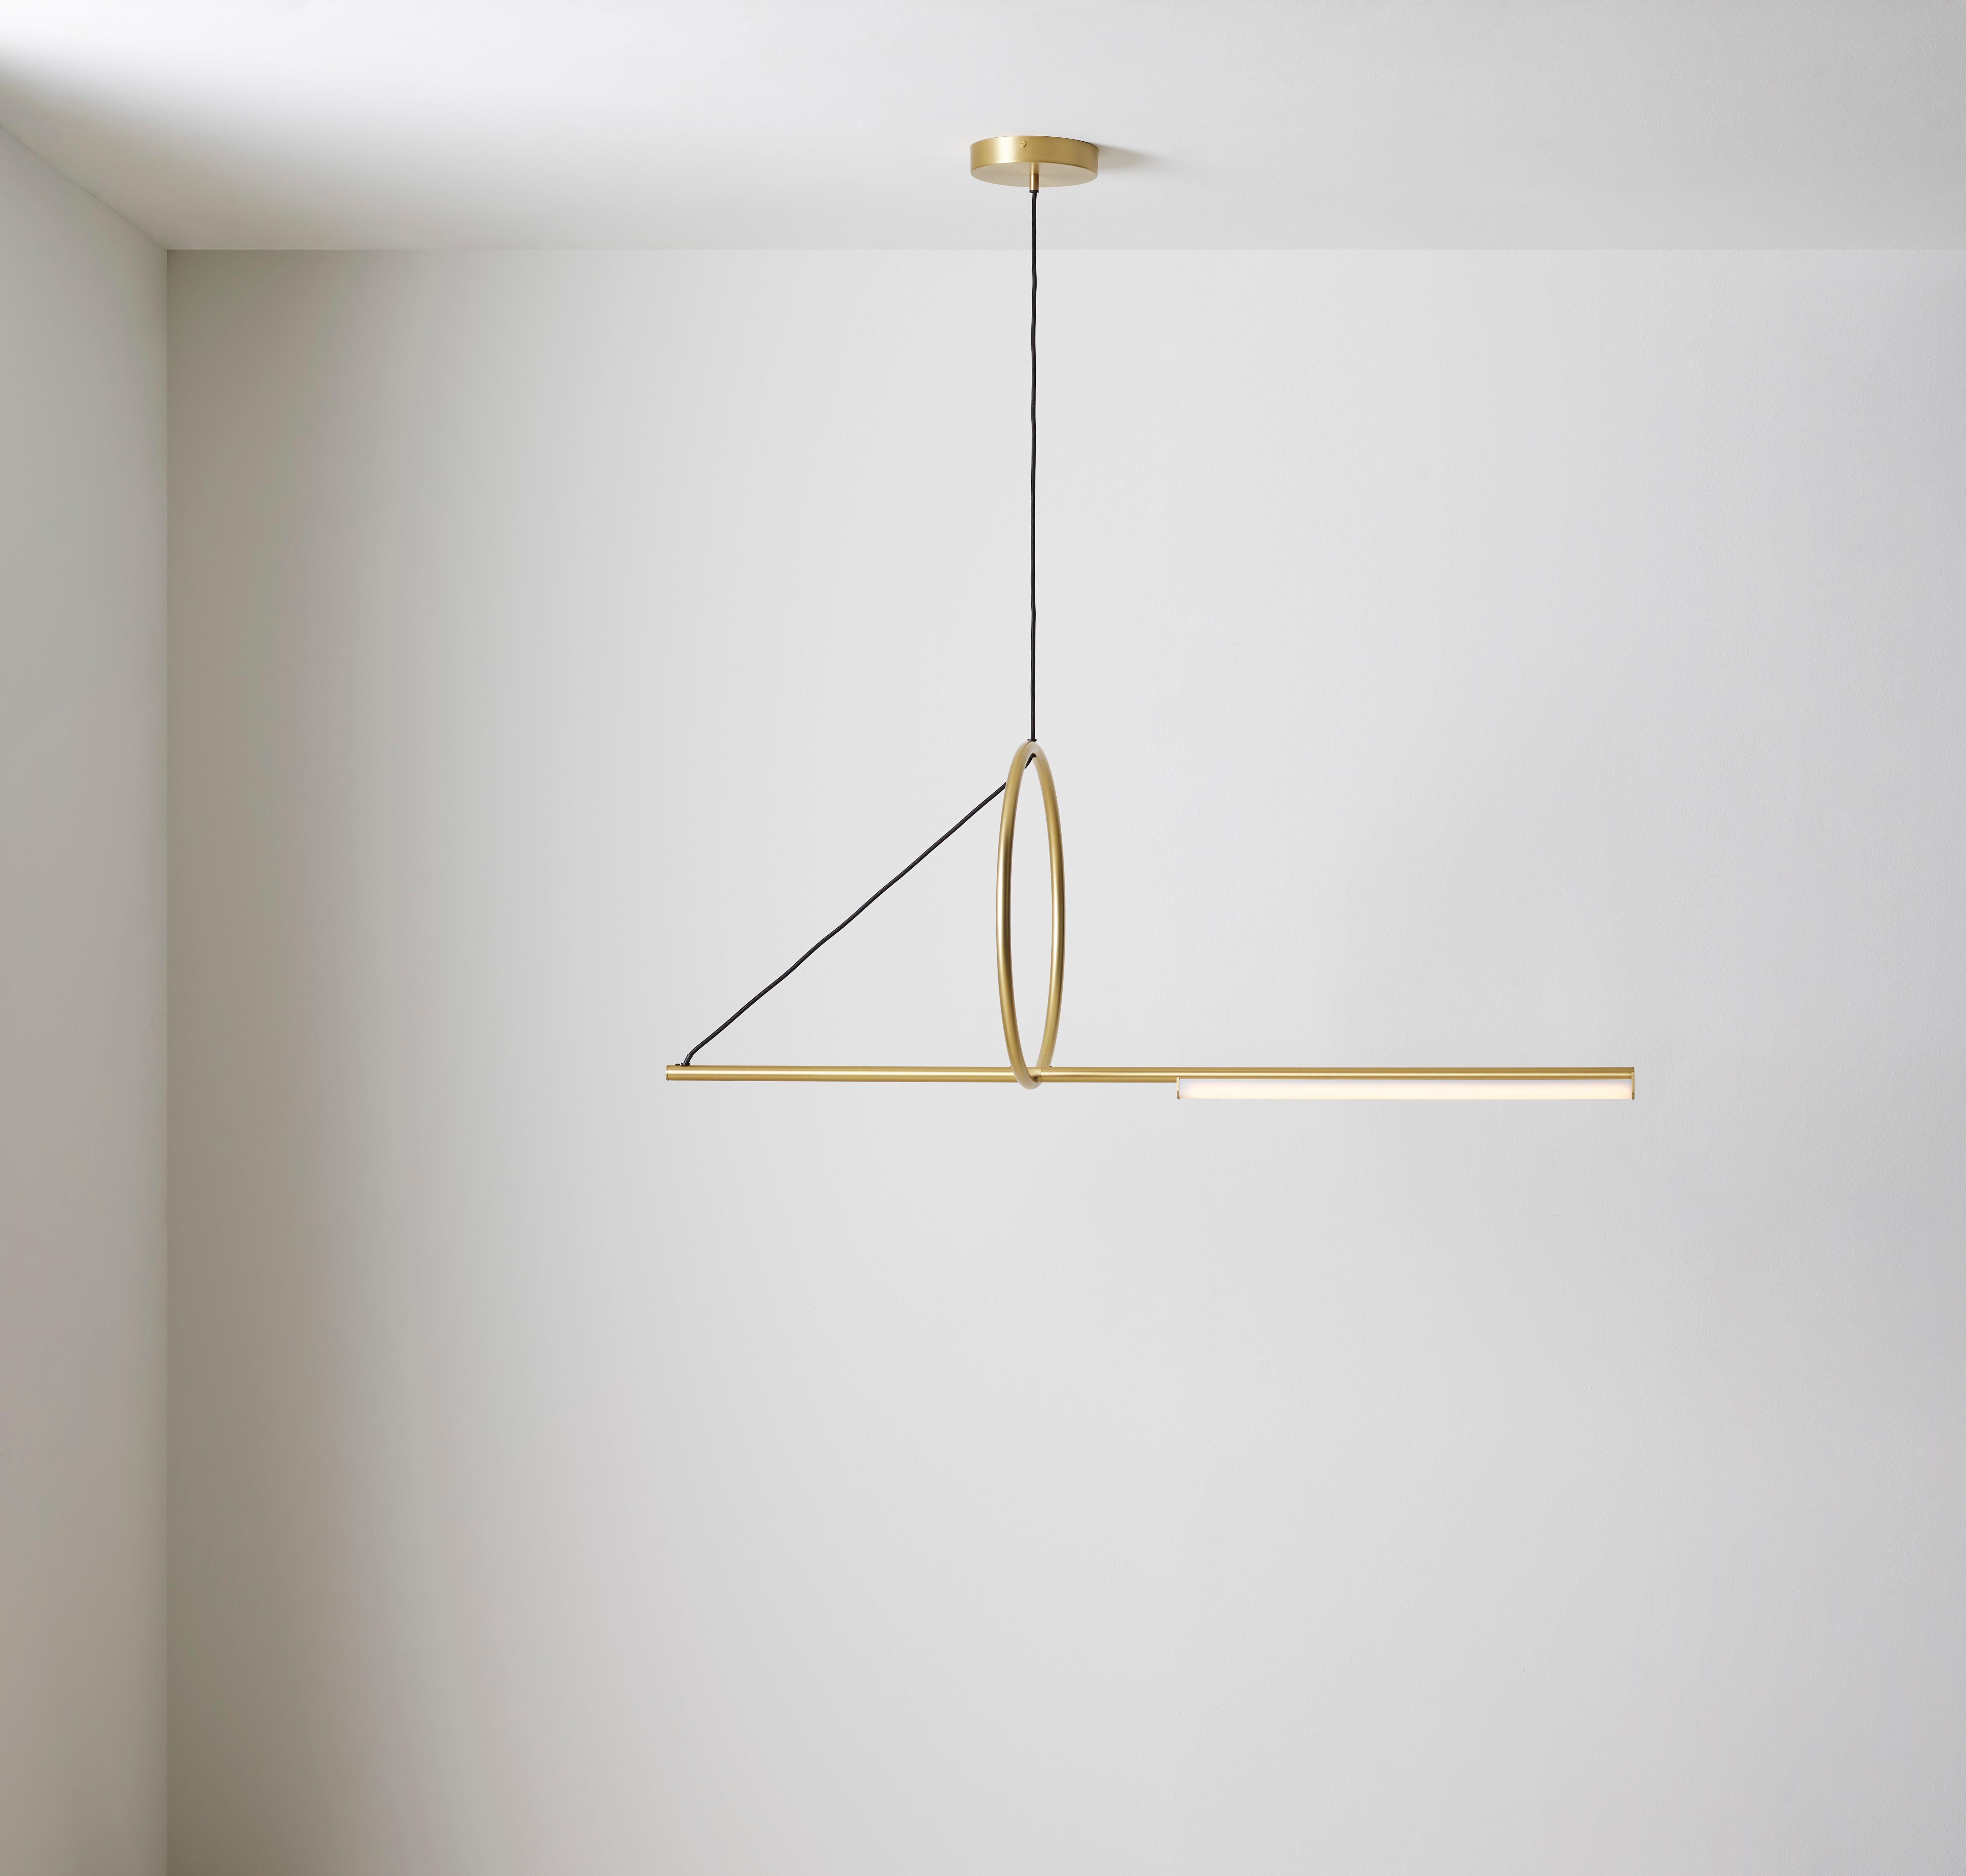 Cercle & Trait XS pendant by Pool
Dimensions: D 123 x W 16 X H 150 cm
Materials: solid brass, polycarbonate, textile cable (1m).
Others finishes and dimensions are available.

All our lamps can be wired according to each country. If sold to the